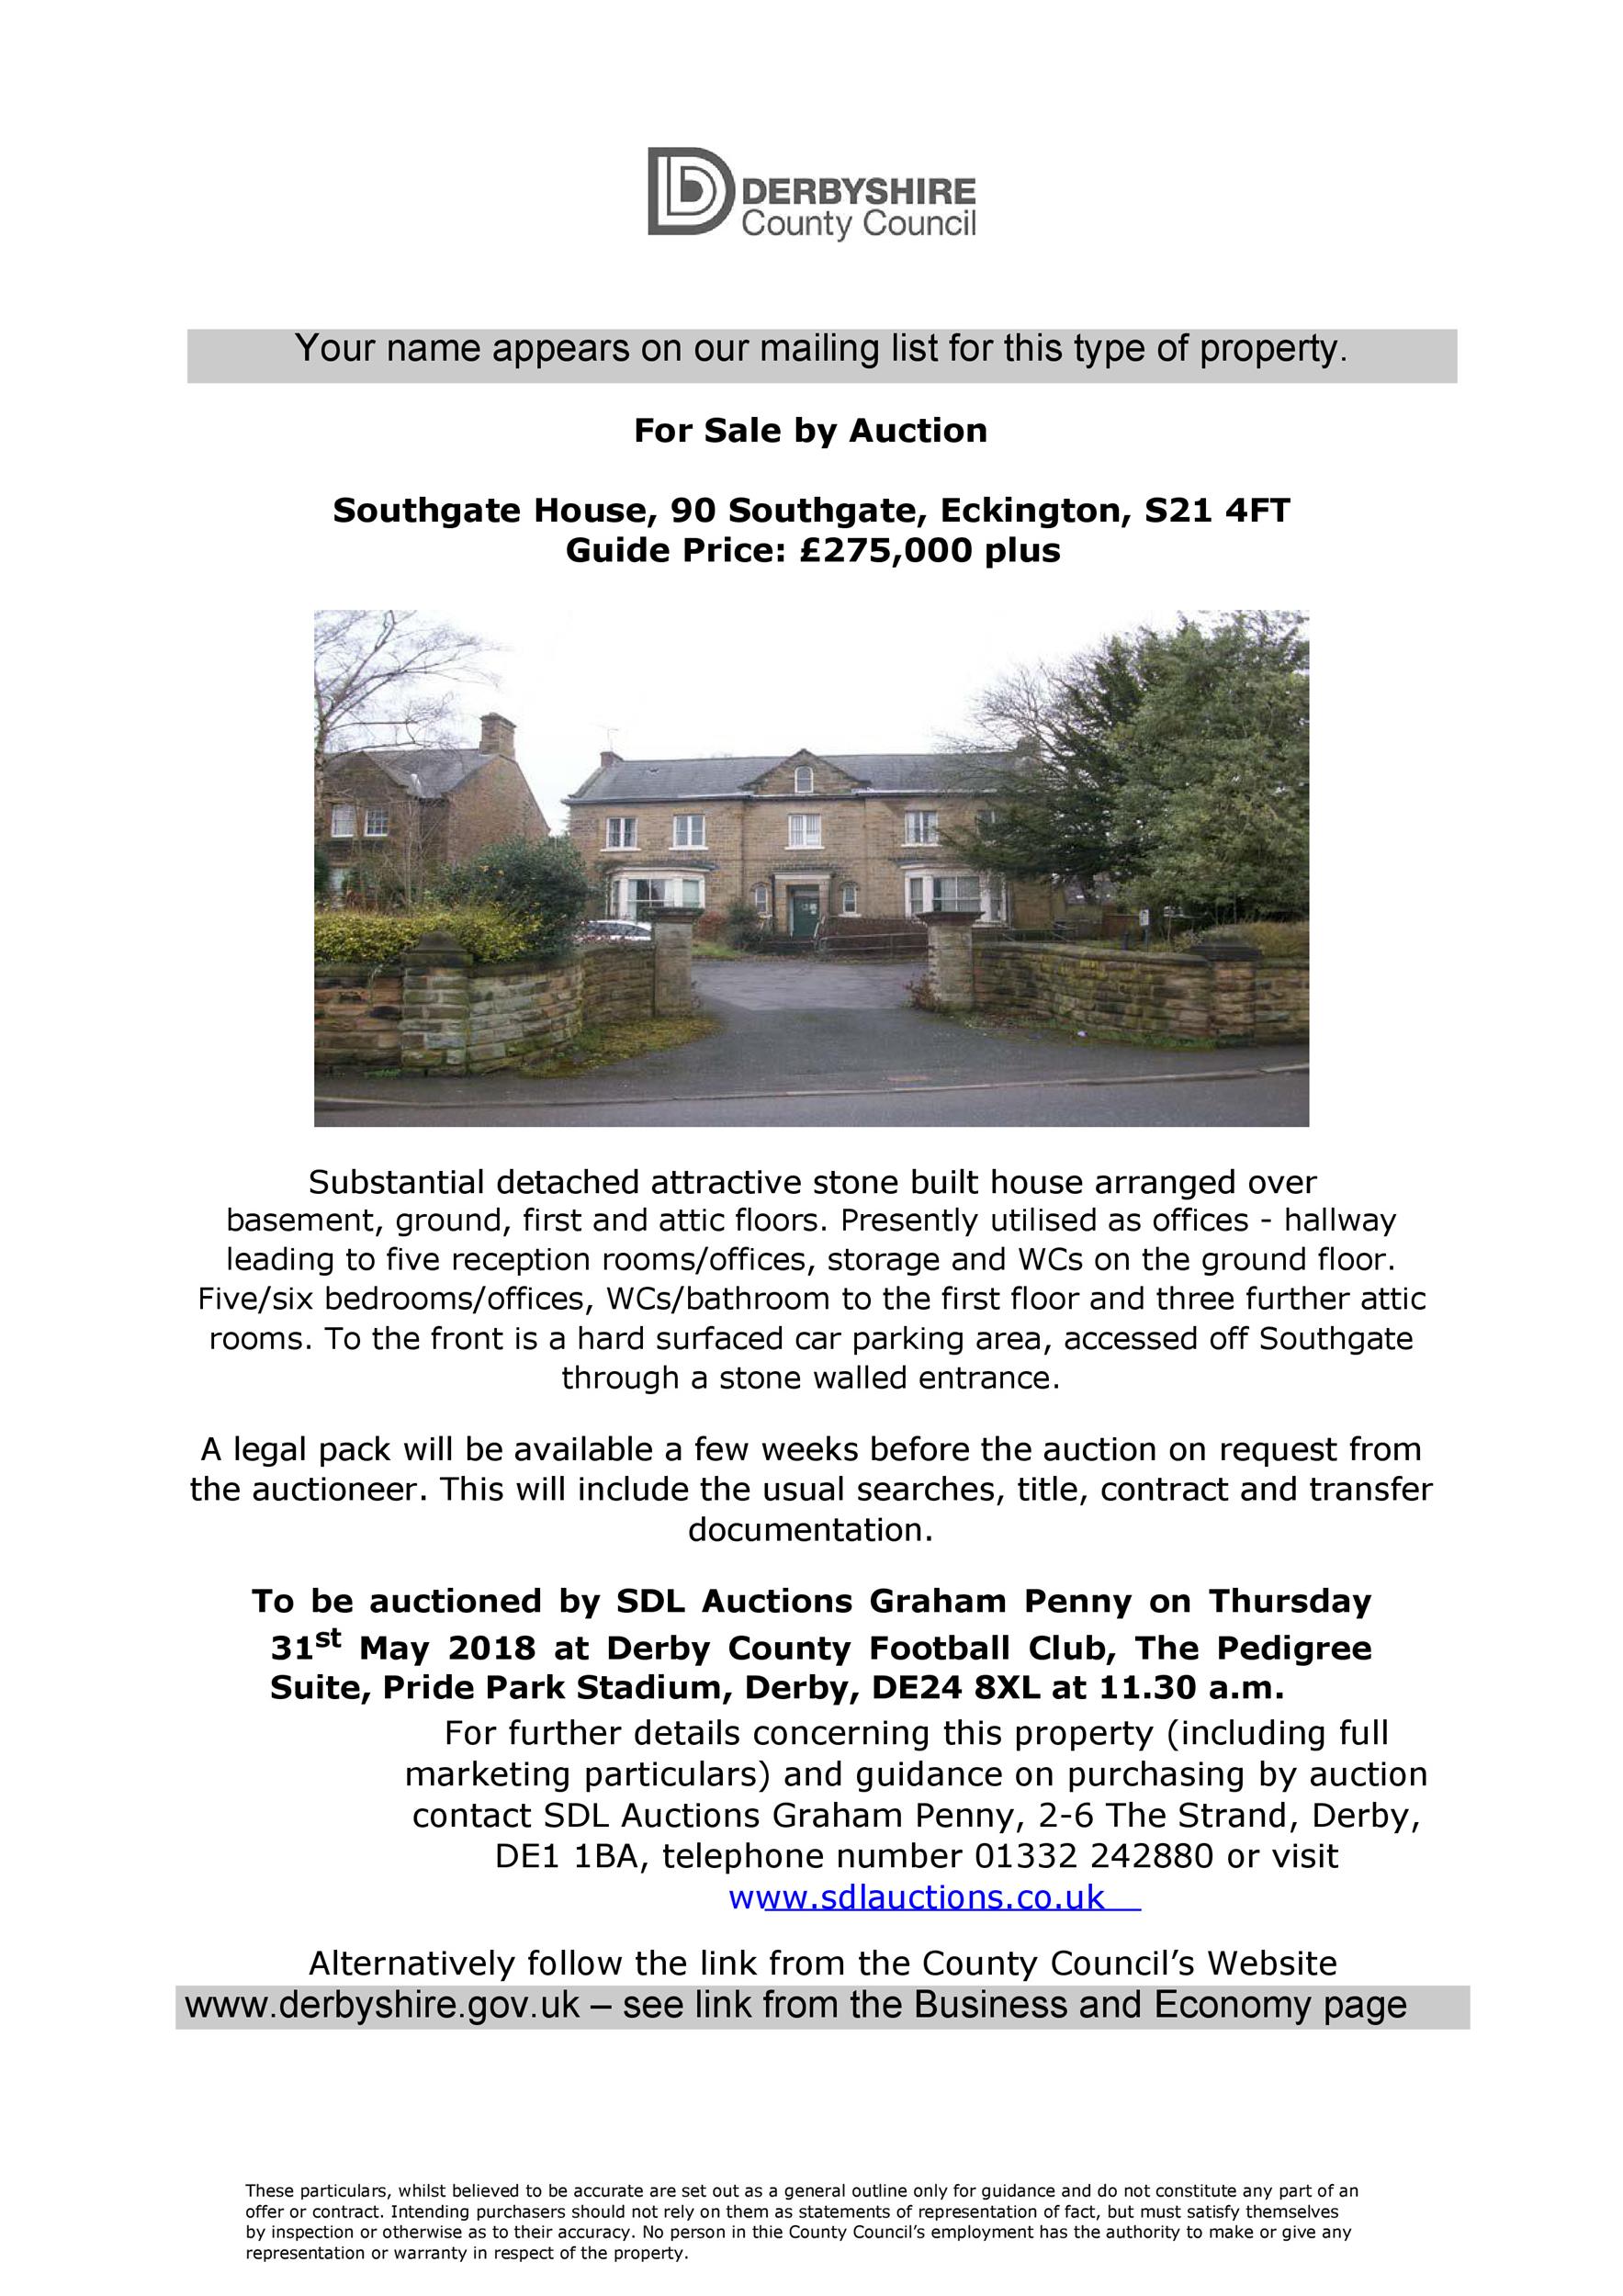 Free house for sale flyer 10